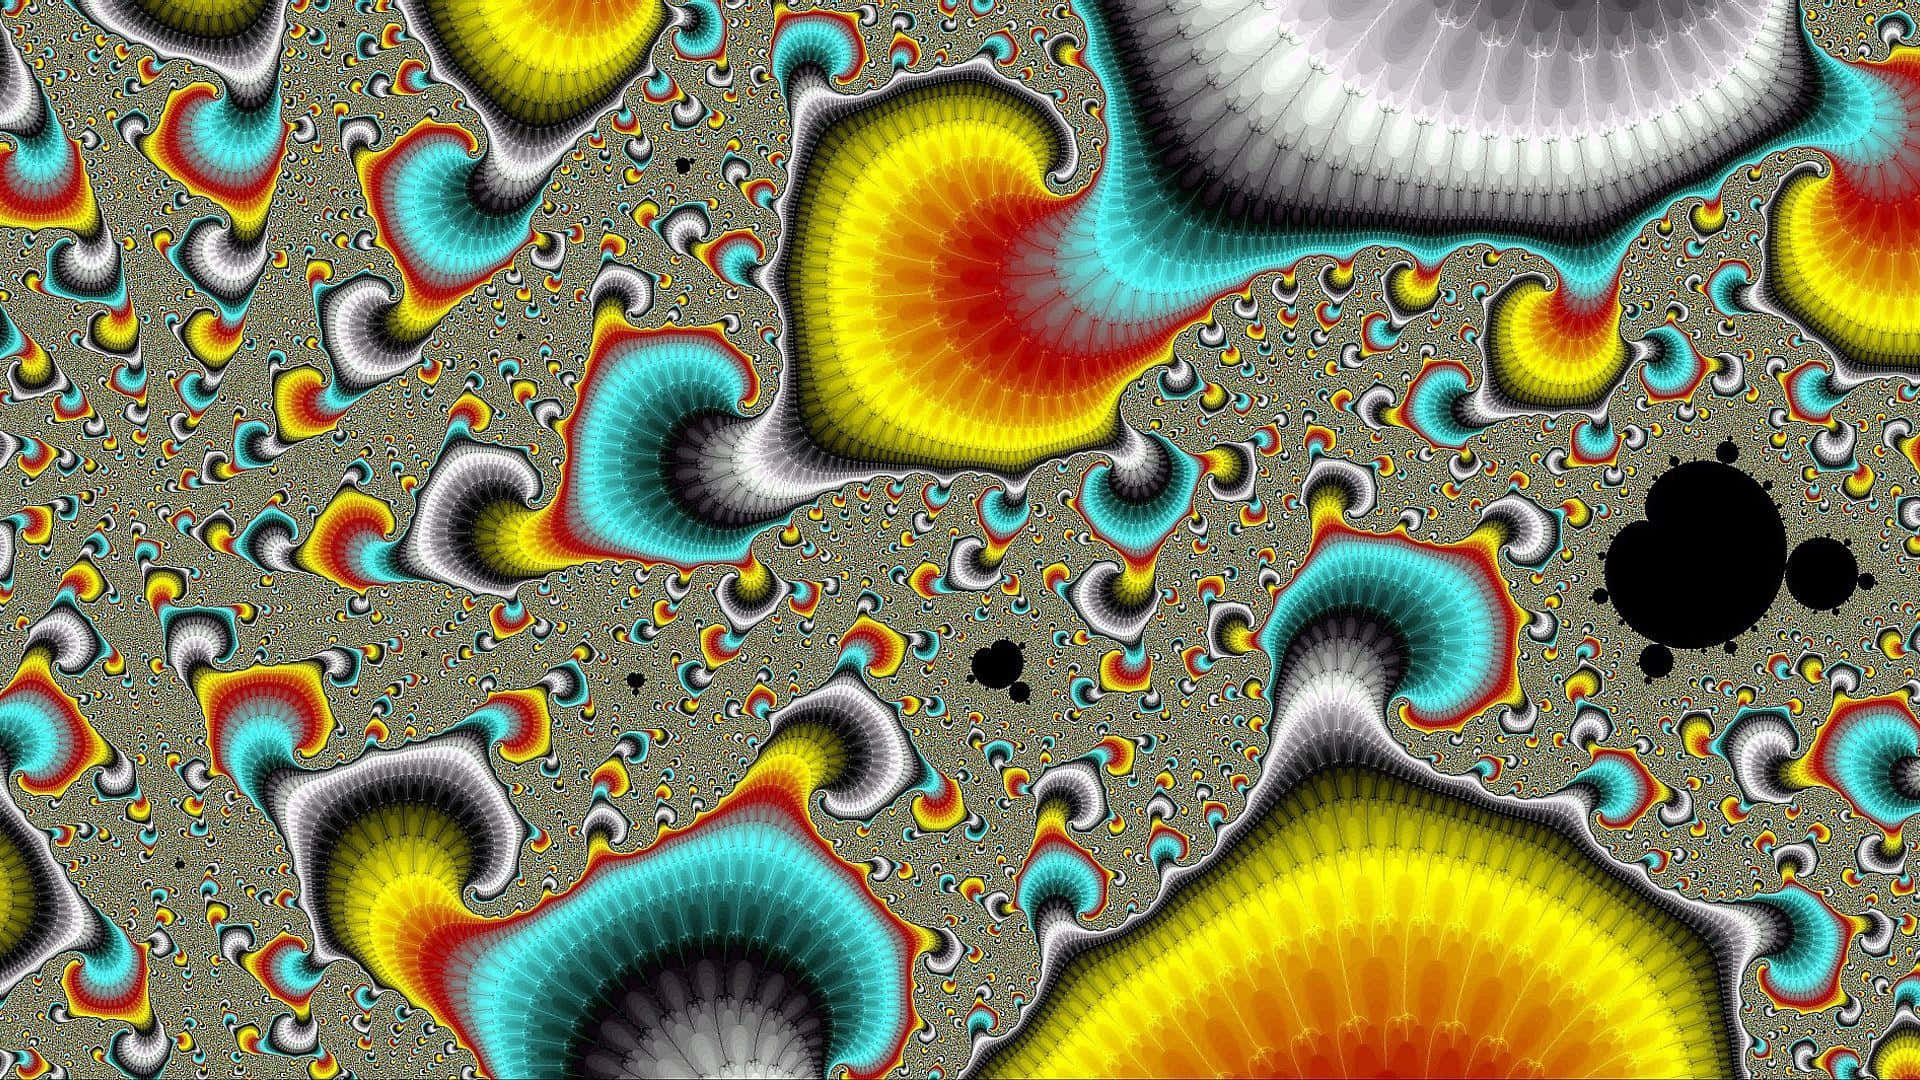 A Colorful Abstract Image With Swirls And Swirls Wallpaper